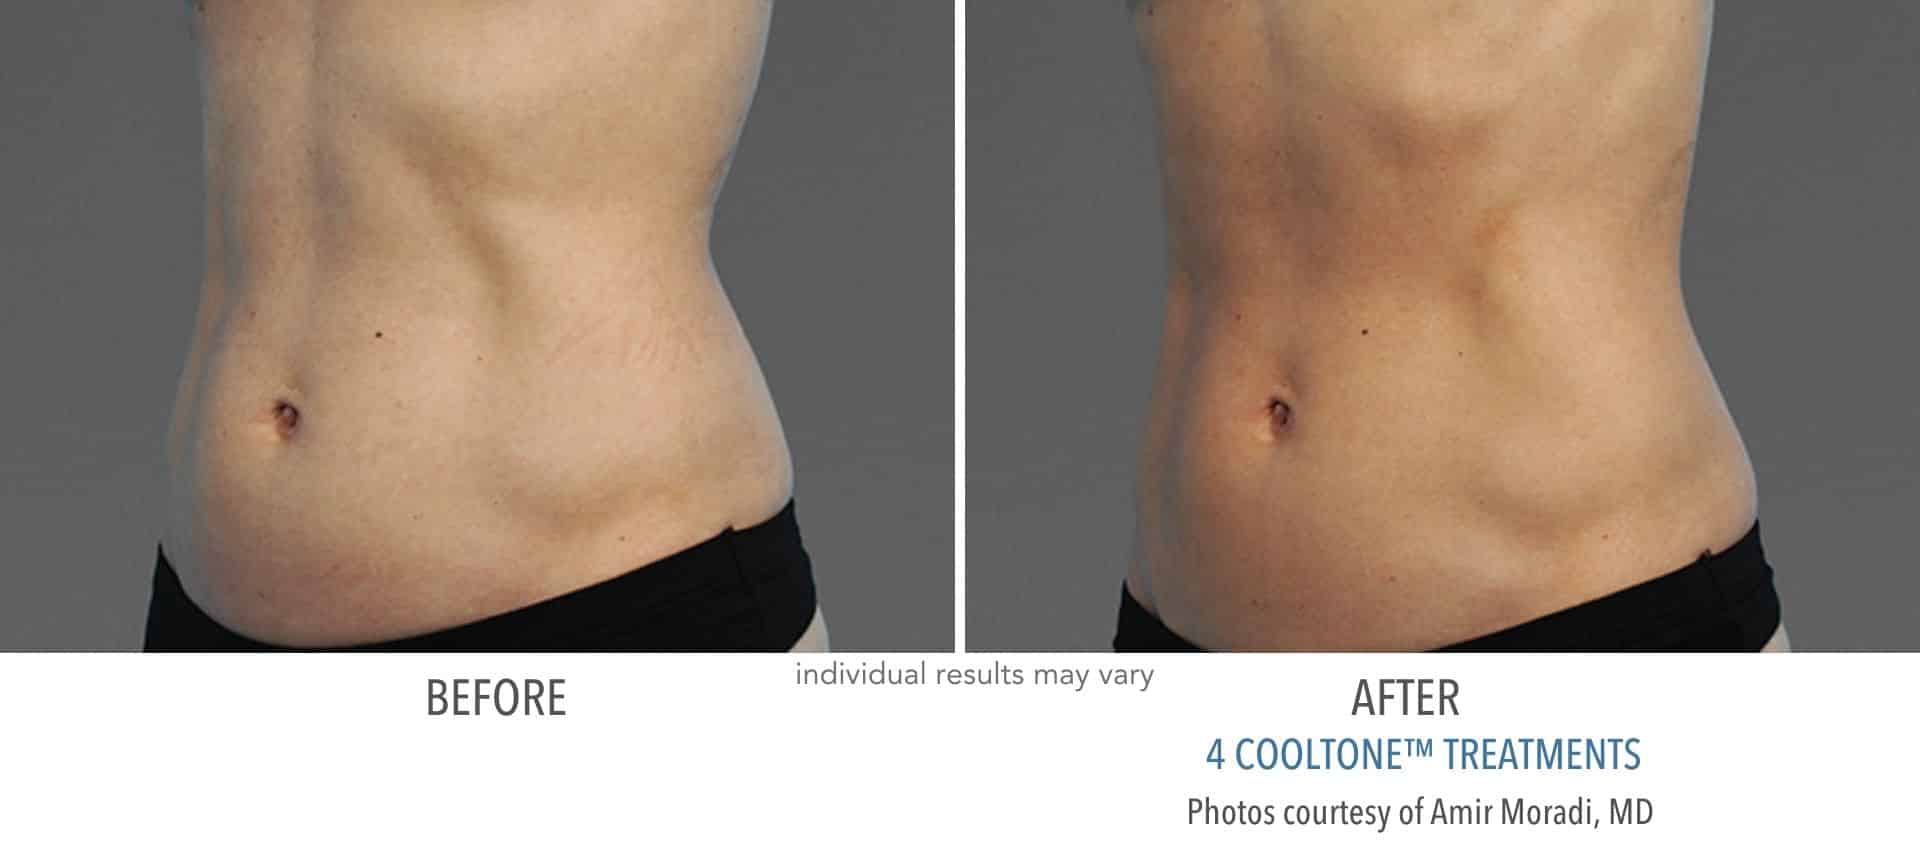 Abdomen before and after cooltone treatment at Sculpt DTLA in Los Angelas.